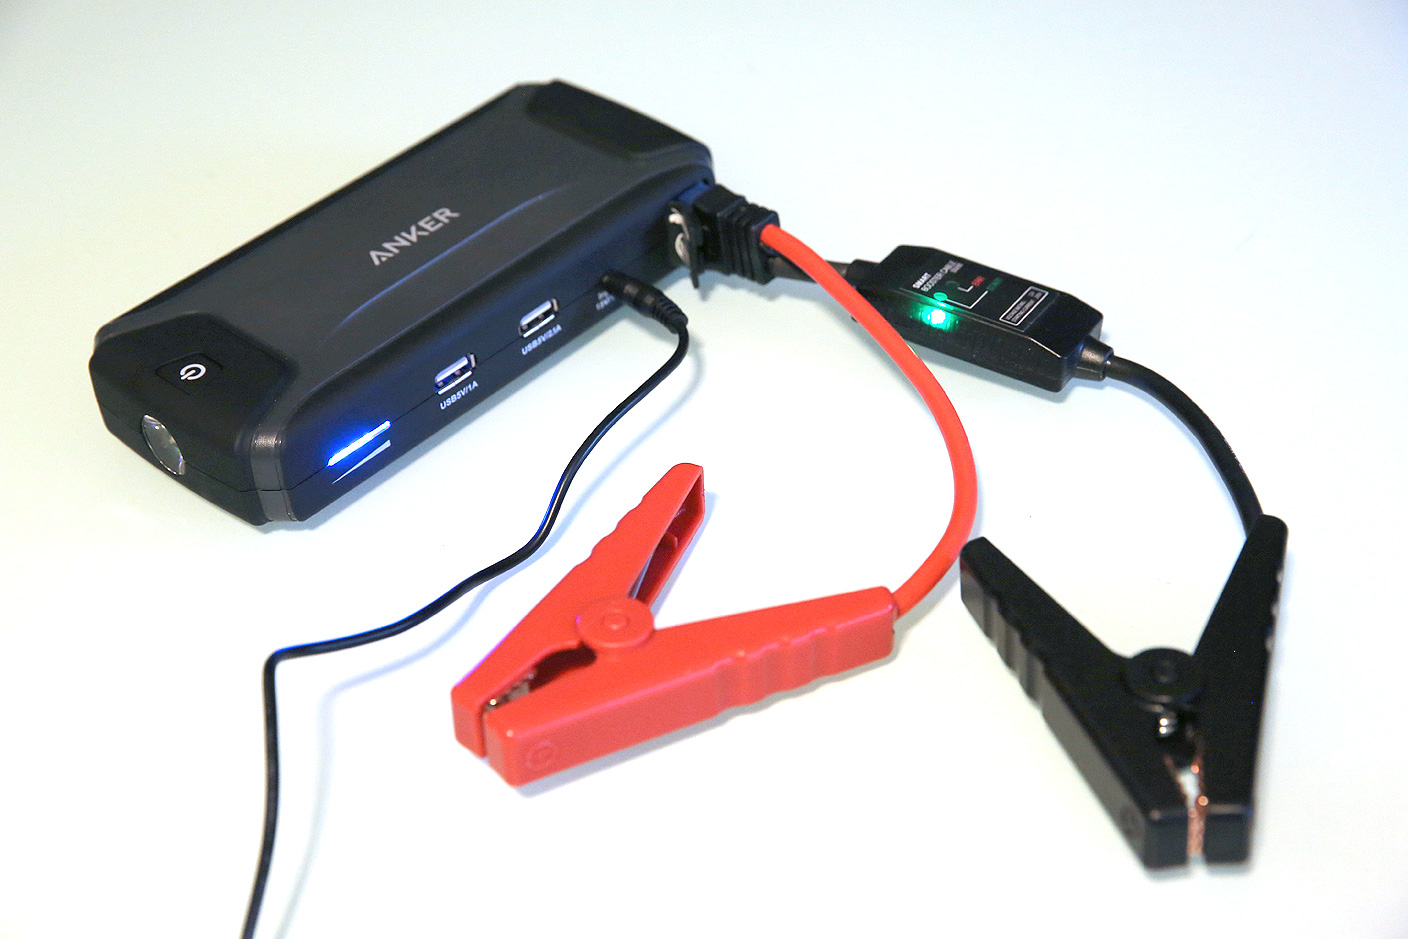 Jump starters vs. battery chargers